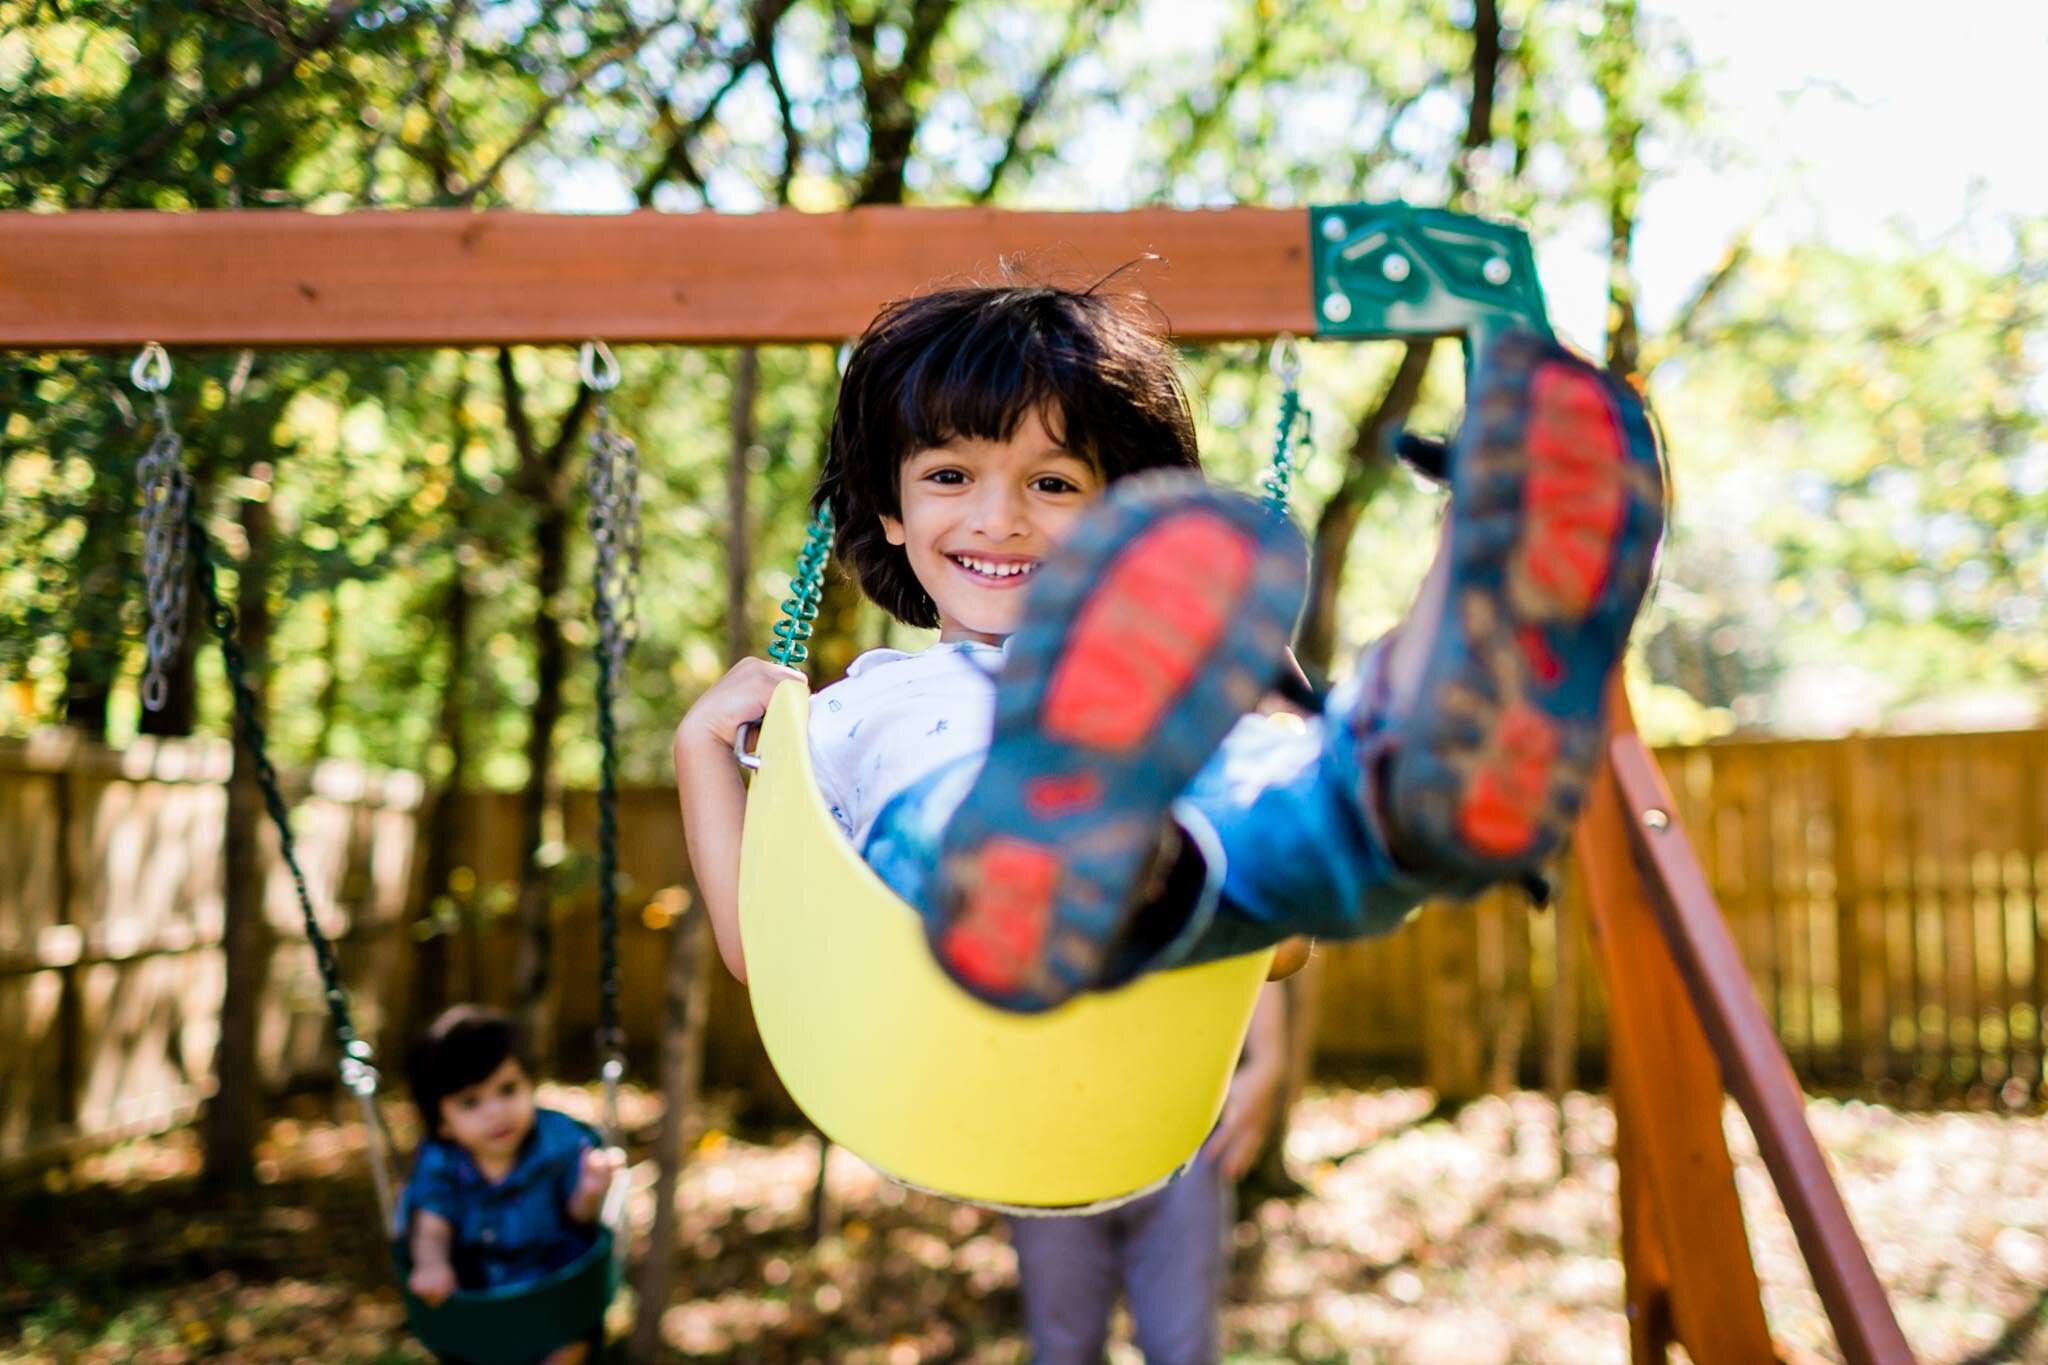 Durham Family Photographer | By G. Lin Photography | Lifestyle family photography | Young boy on swing